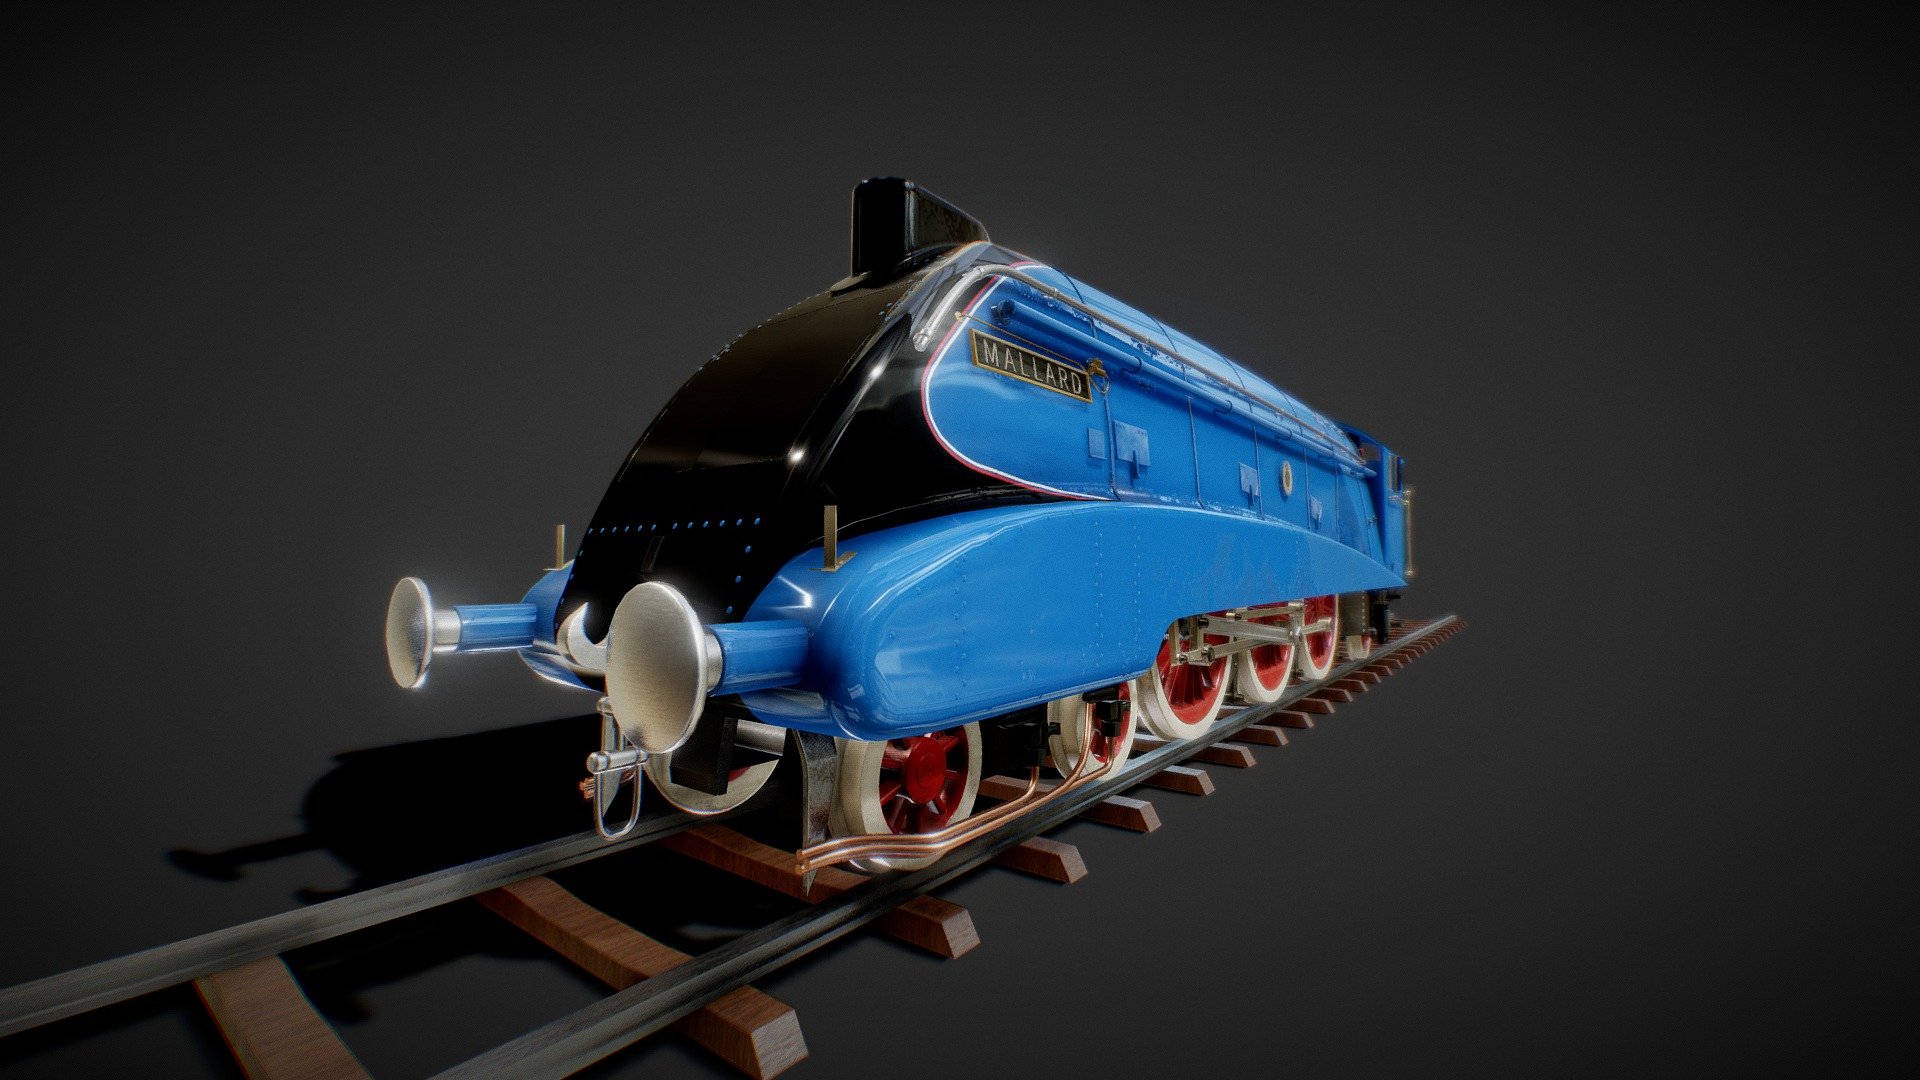 Mallard is the holder of the world speed record for steam locomotives at 126 mph (203 km/h) on 3 July 1938. The A4 class was designed by Nigel Gresley to power high-speed streamlined trains. The wind-tunnel-tested, aerodynamic body and high power allowed the class to reach speeds of over 100 miles per hour (160 km/h), although in everyday service it rarely attained this speed. While in British Railways days regular steam-hauled rail services in the UK were officially limited to a 90 mph &lsquo;line speed', pre-war, the A4s had to run significantly above 90 mph just to keep schedule on trains such as the Silver Jubilee and The Coronation, with the engines reaching 100 mph on many occasions. Mallard covered almost one and a half million miles (2.4 million km) before it was retired in 1963 3d model